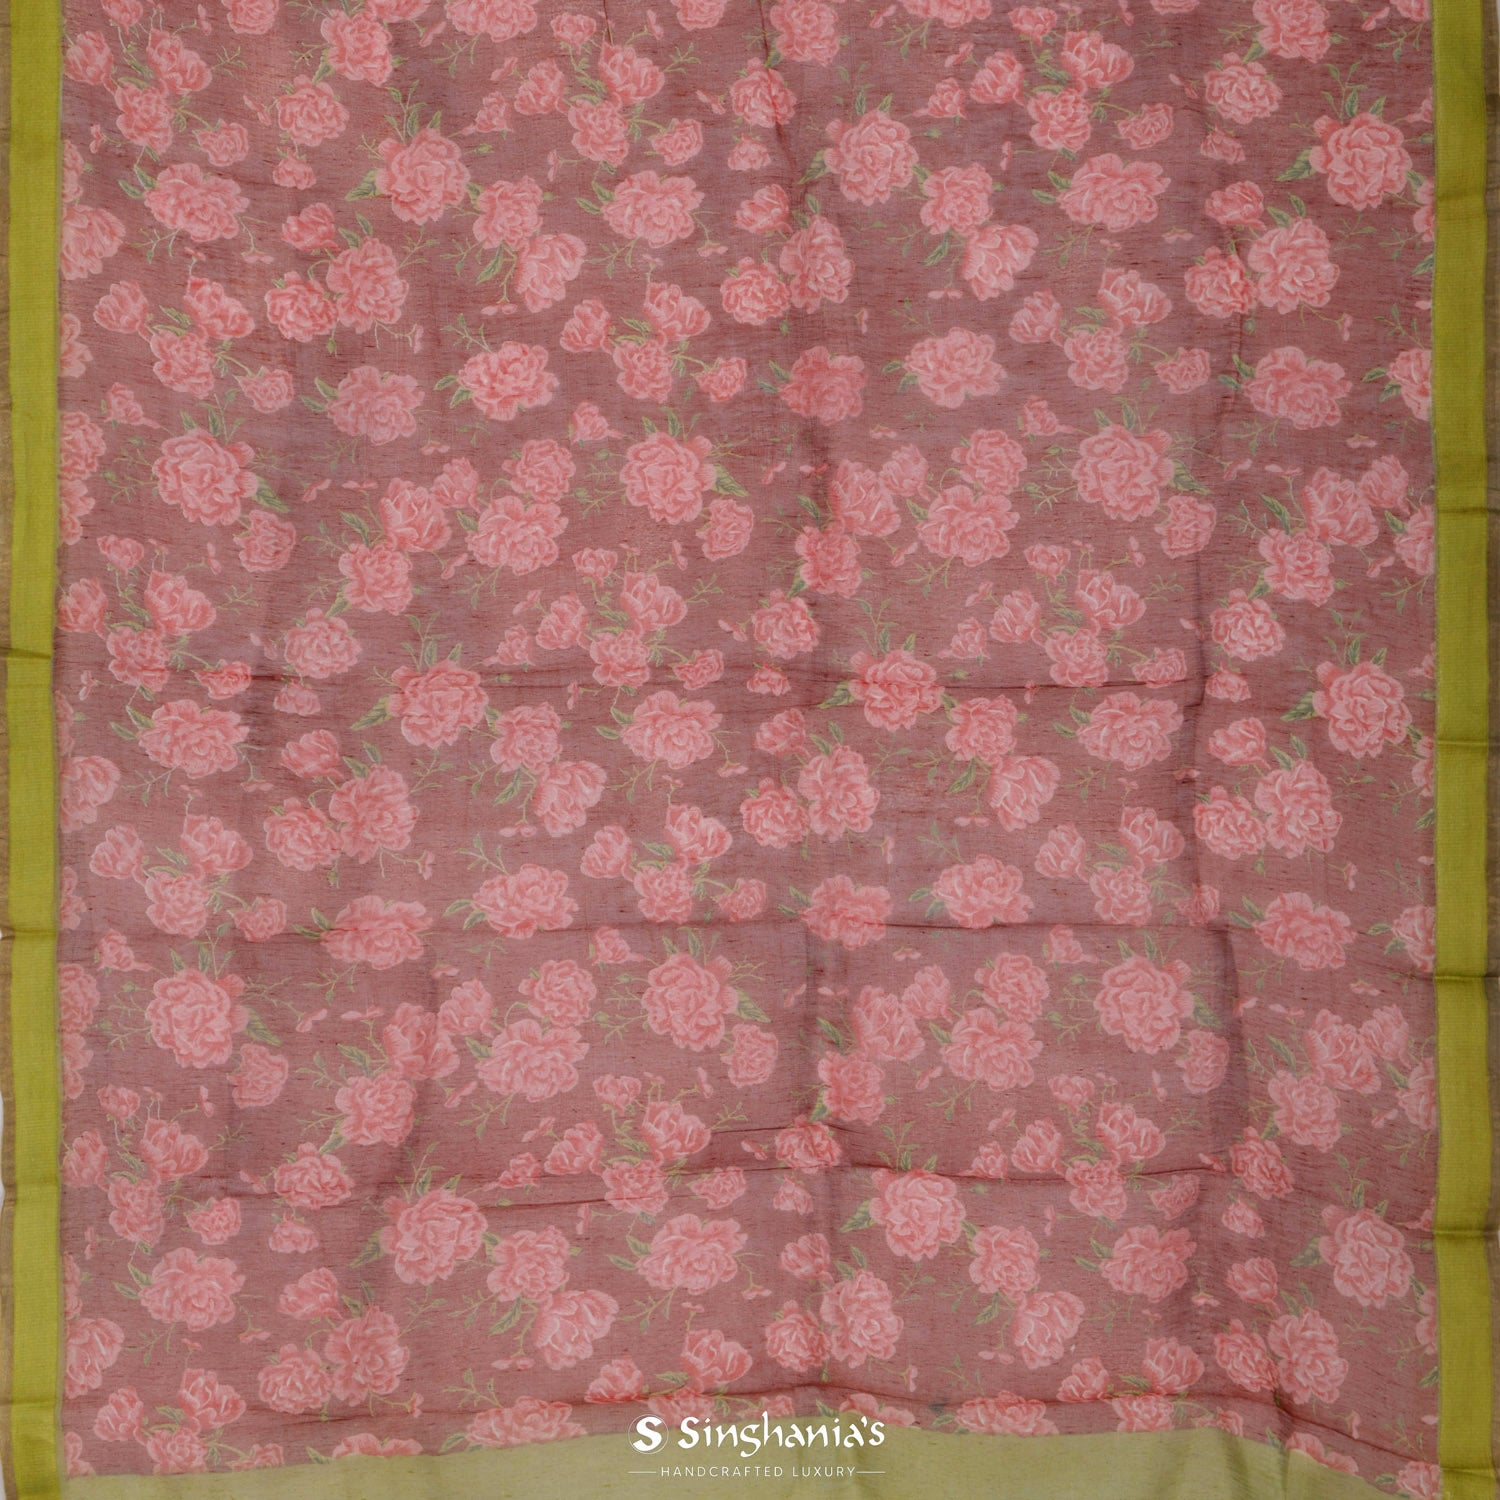 Mecca Orange Linen Saree With Printed Floral Pattern